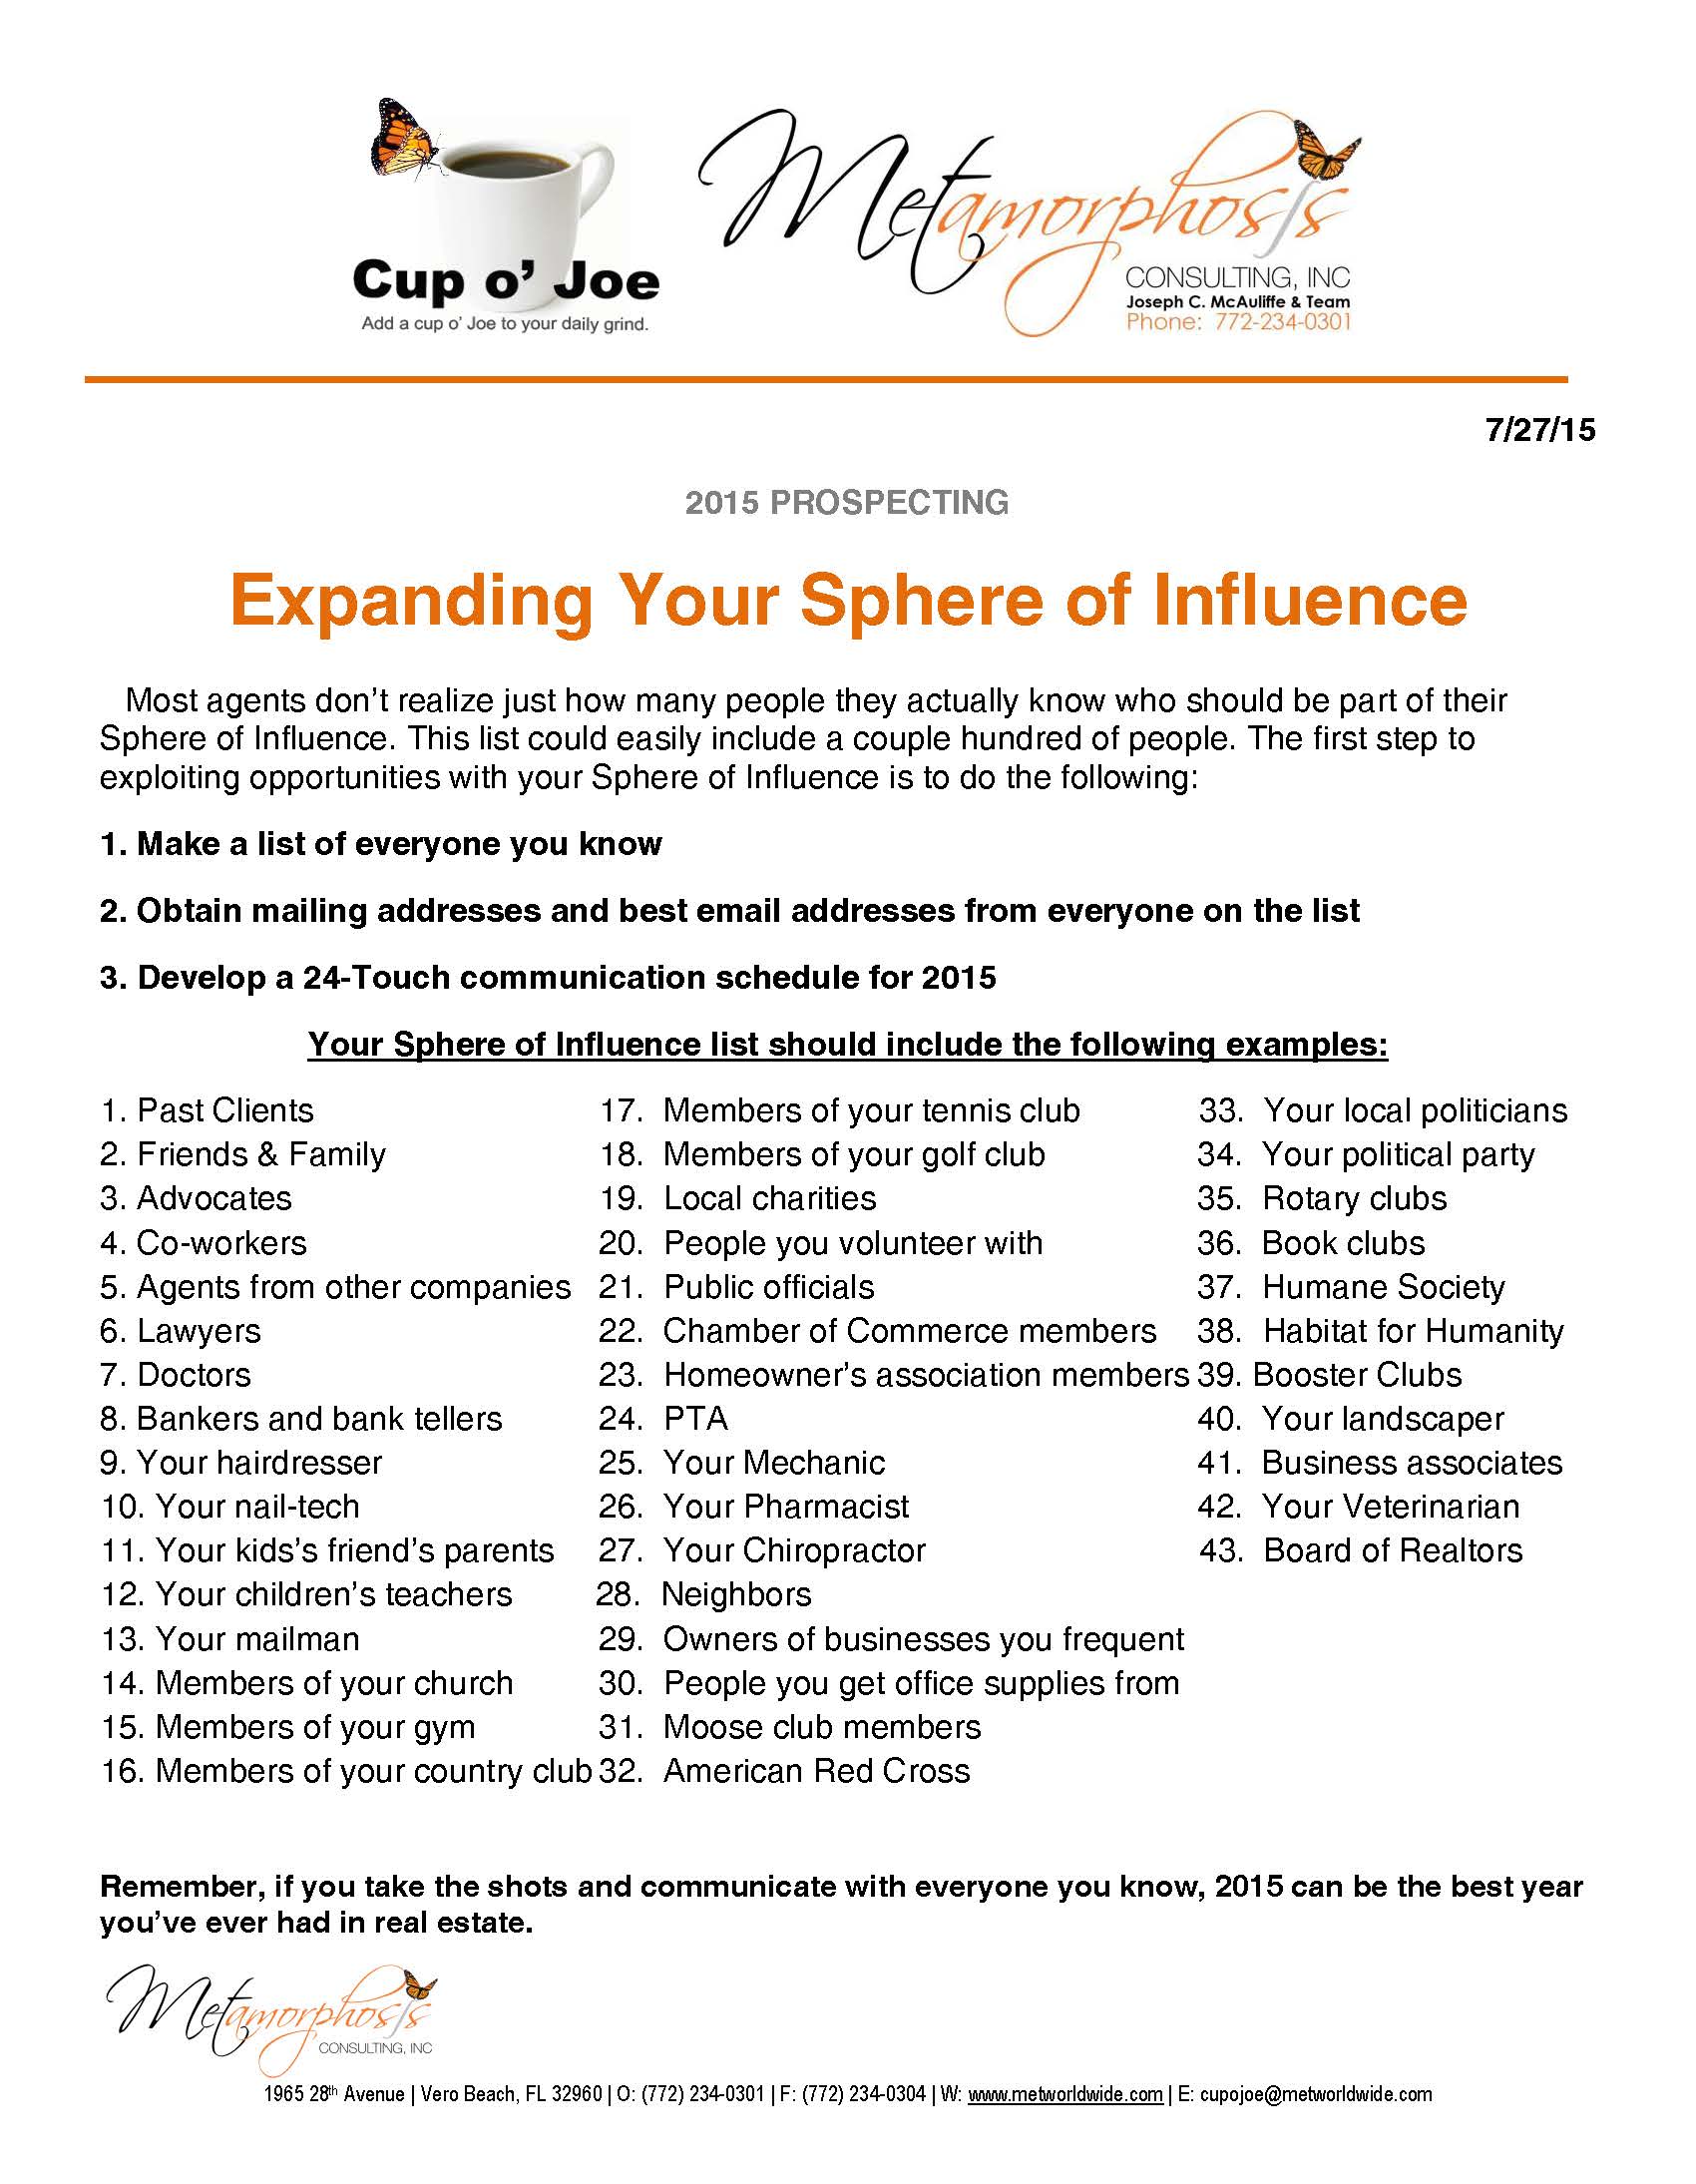 7-27-15_2015 Prospecting- Expanding Your Sphere of Influence